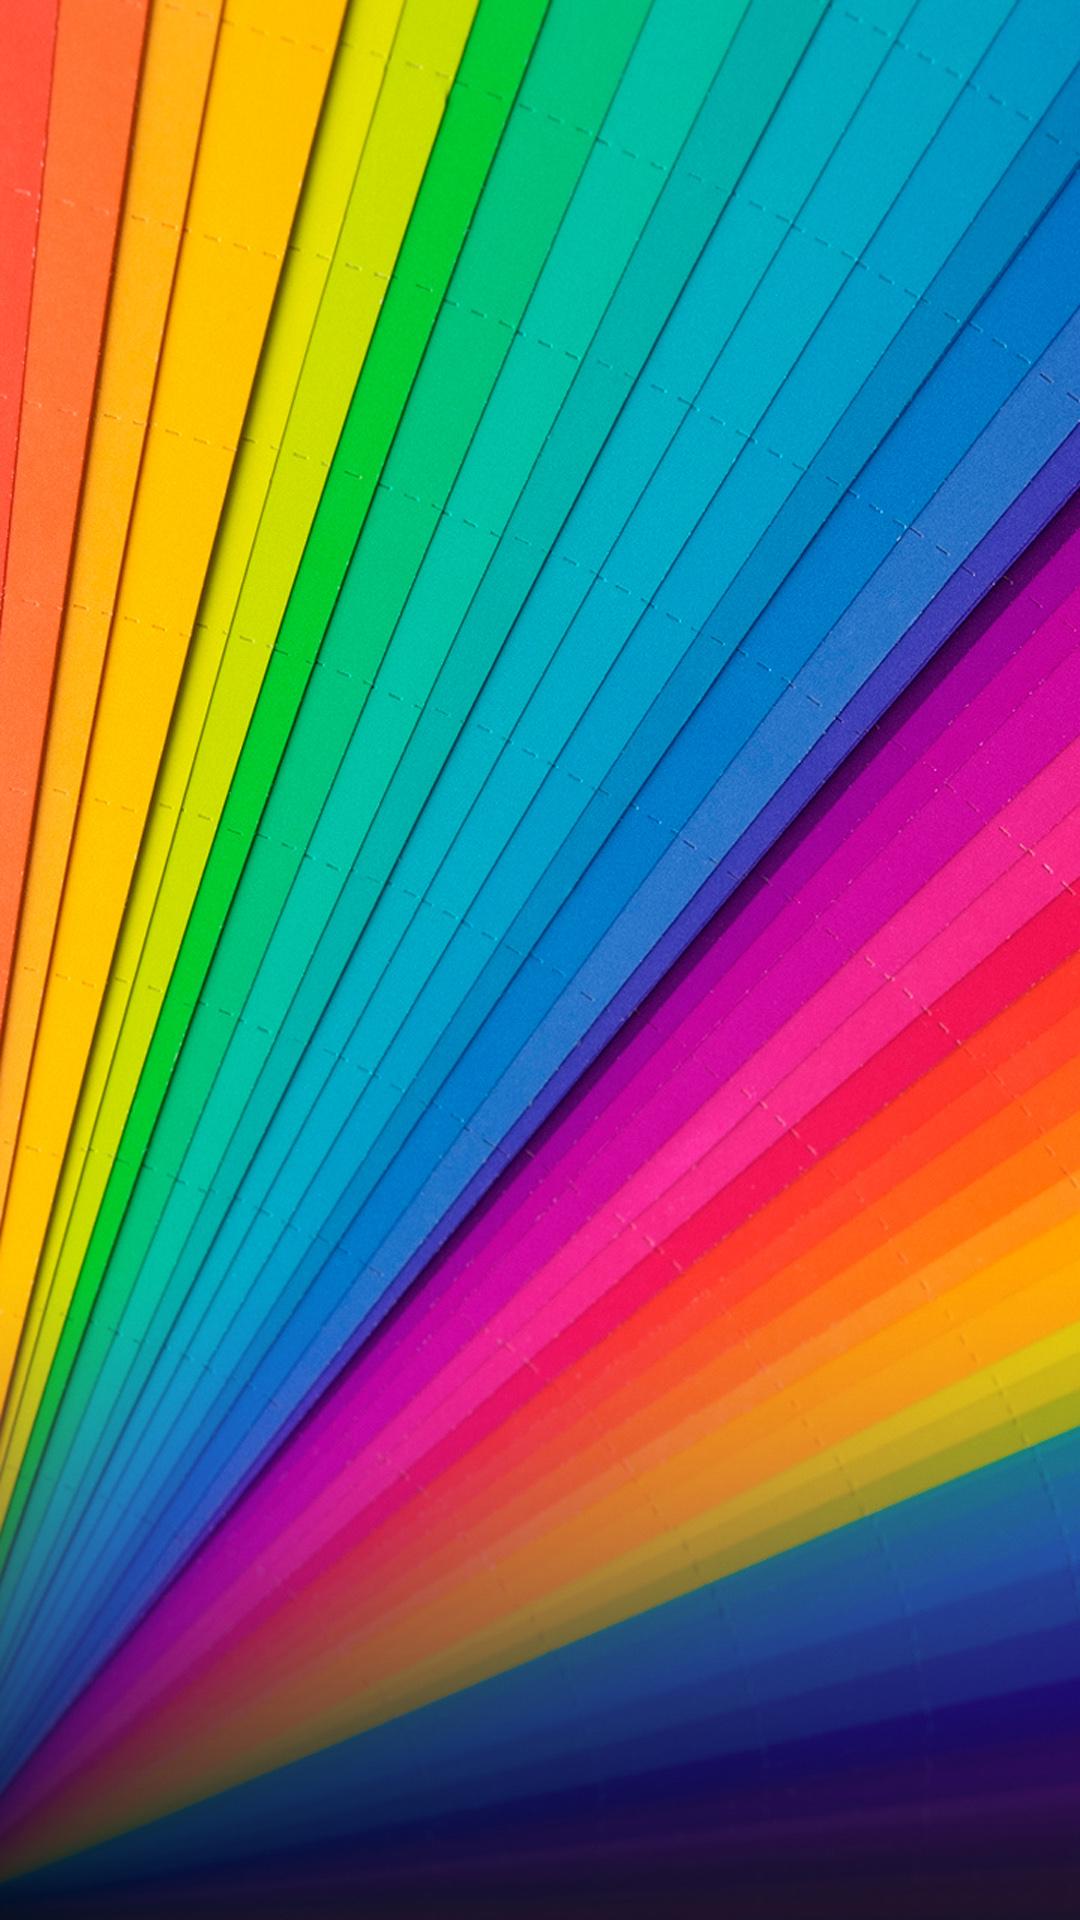 Free download color theme iphone 6 plus wallpaper iPhone 6